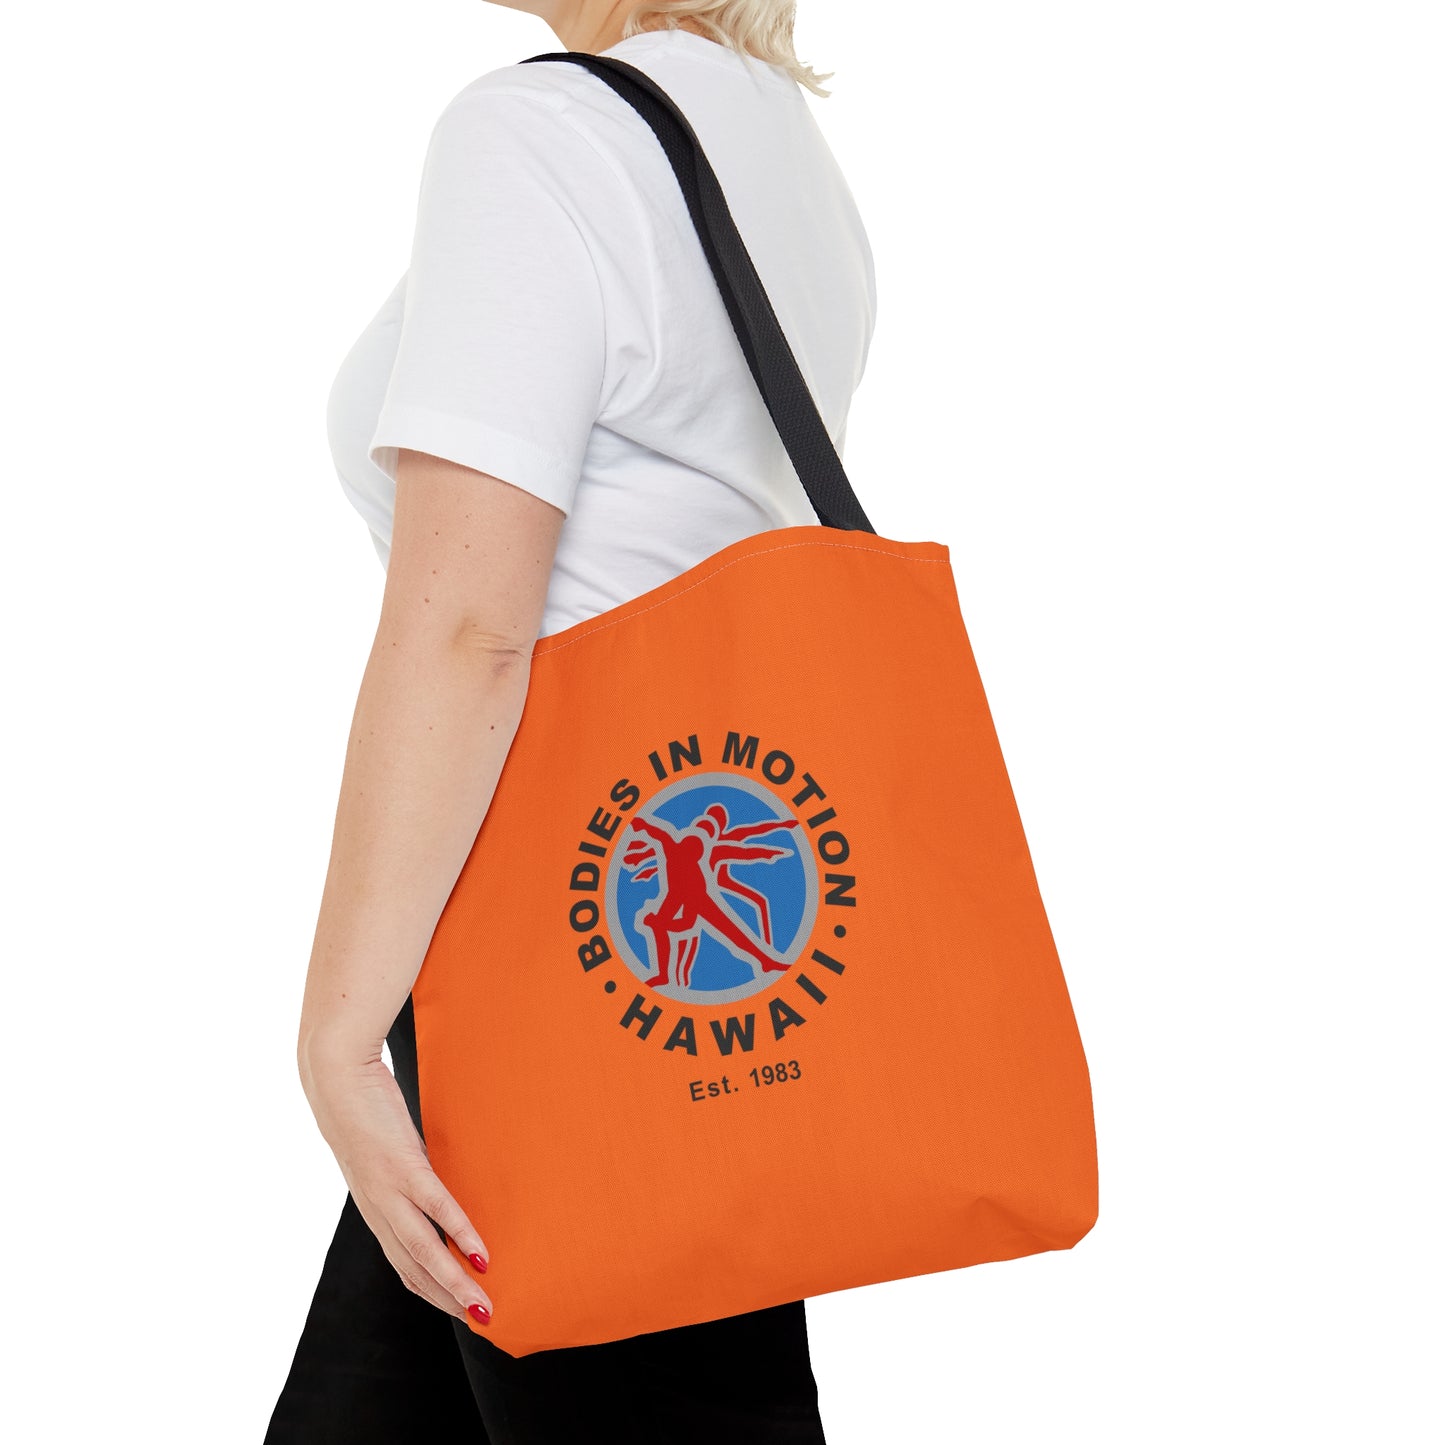 Bodies in Motion Tote Bag